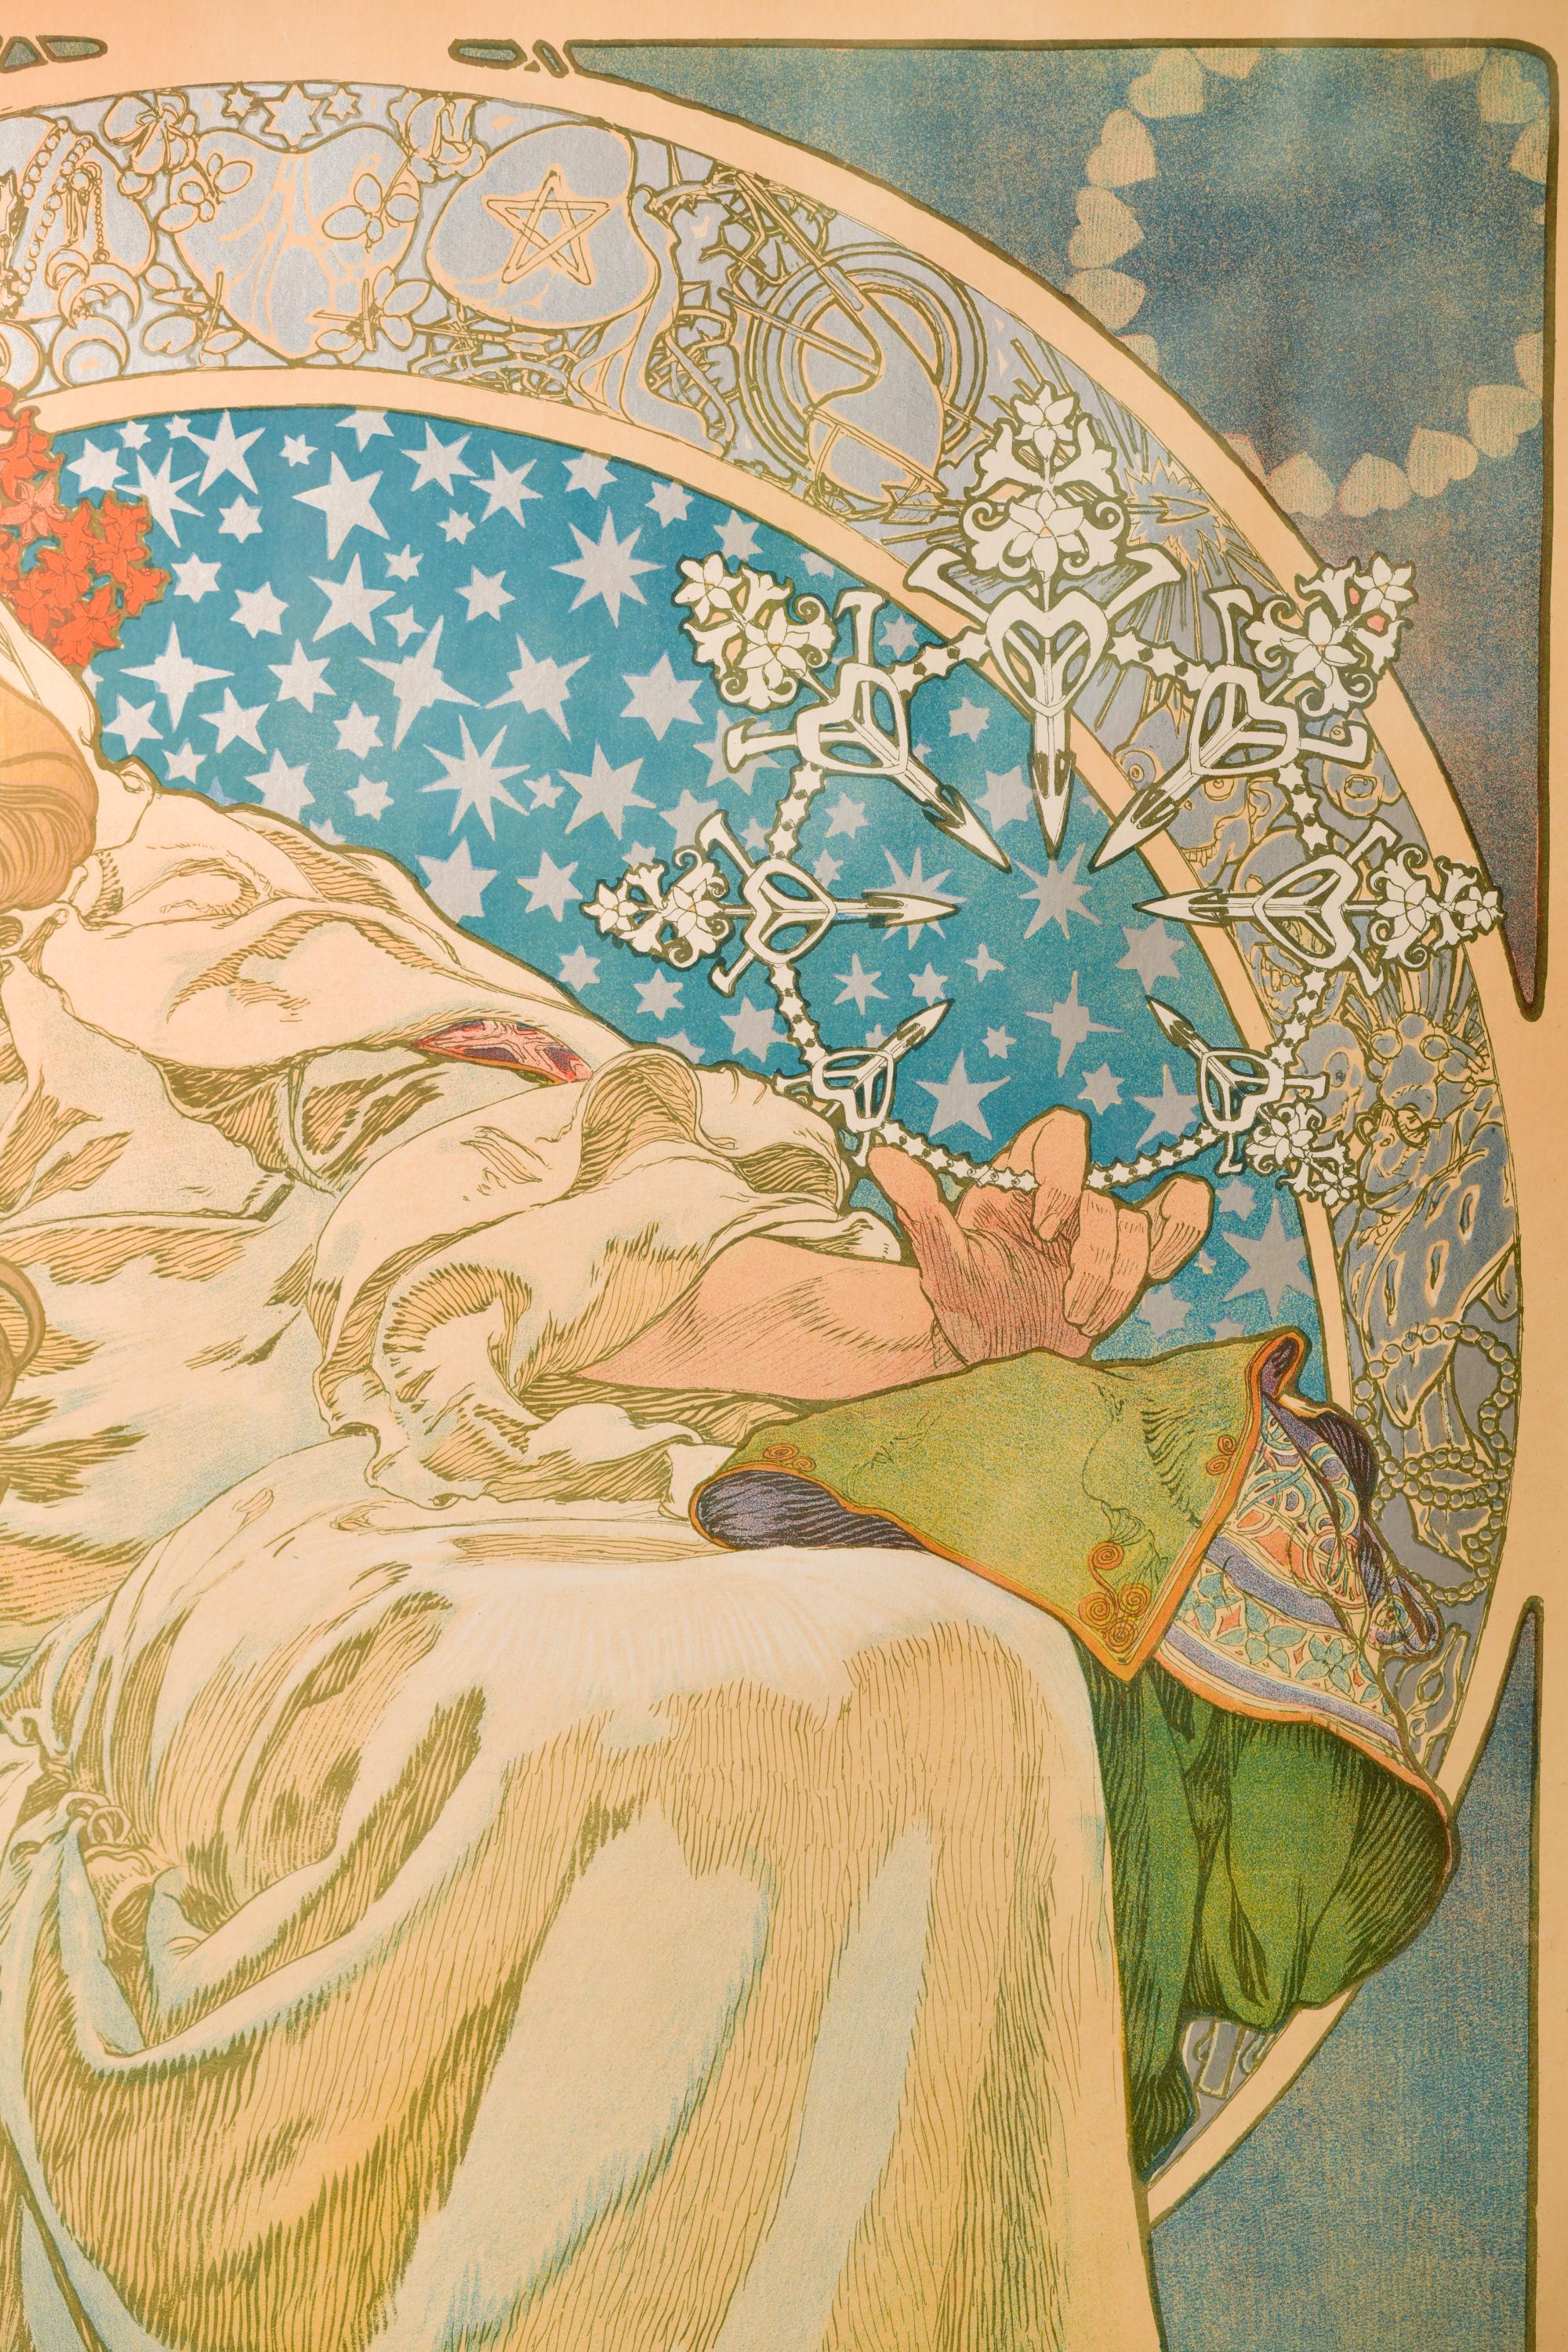 “One of Mucha’s best Czech posters, printed by the firm of V. Neubert in the Smichov quarter of Prague, was for Princezna Hyacinta, a fairy-tale ballet and pantomime with music by Oskar Nedbal and libretto by Ladislav Novák. The portrait of the